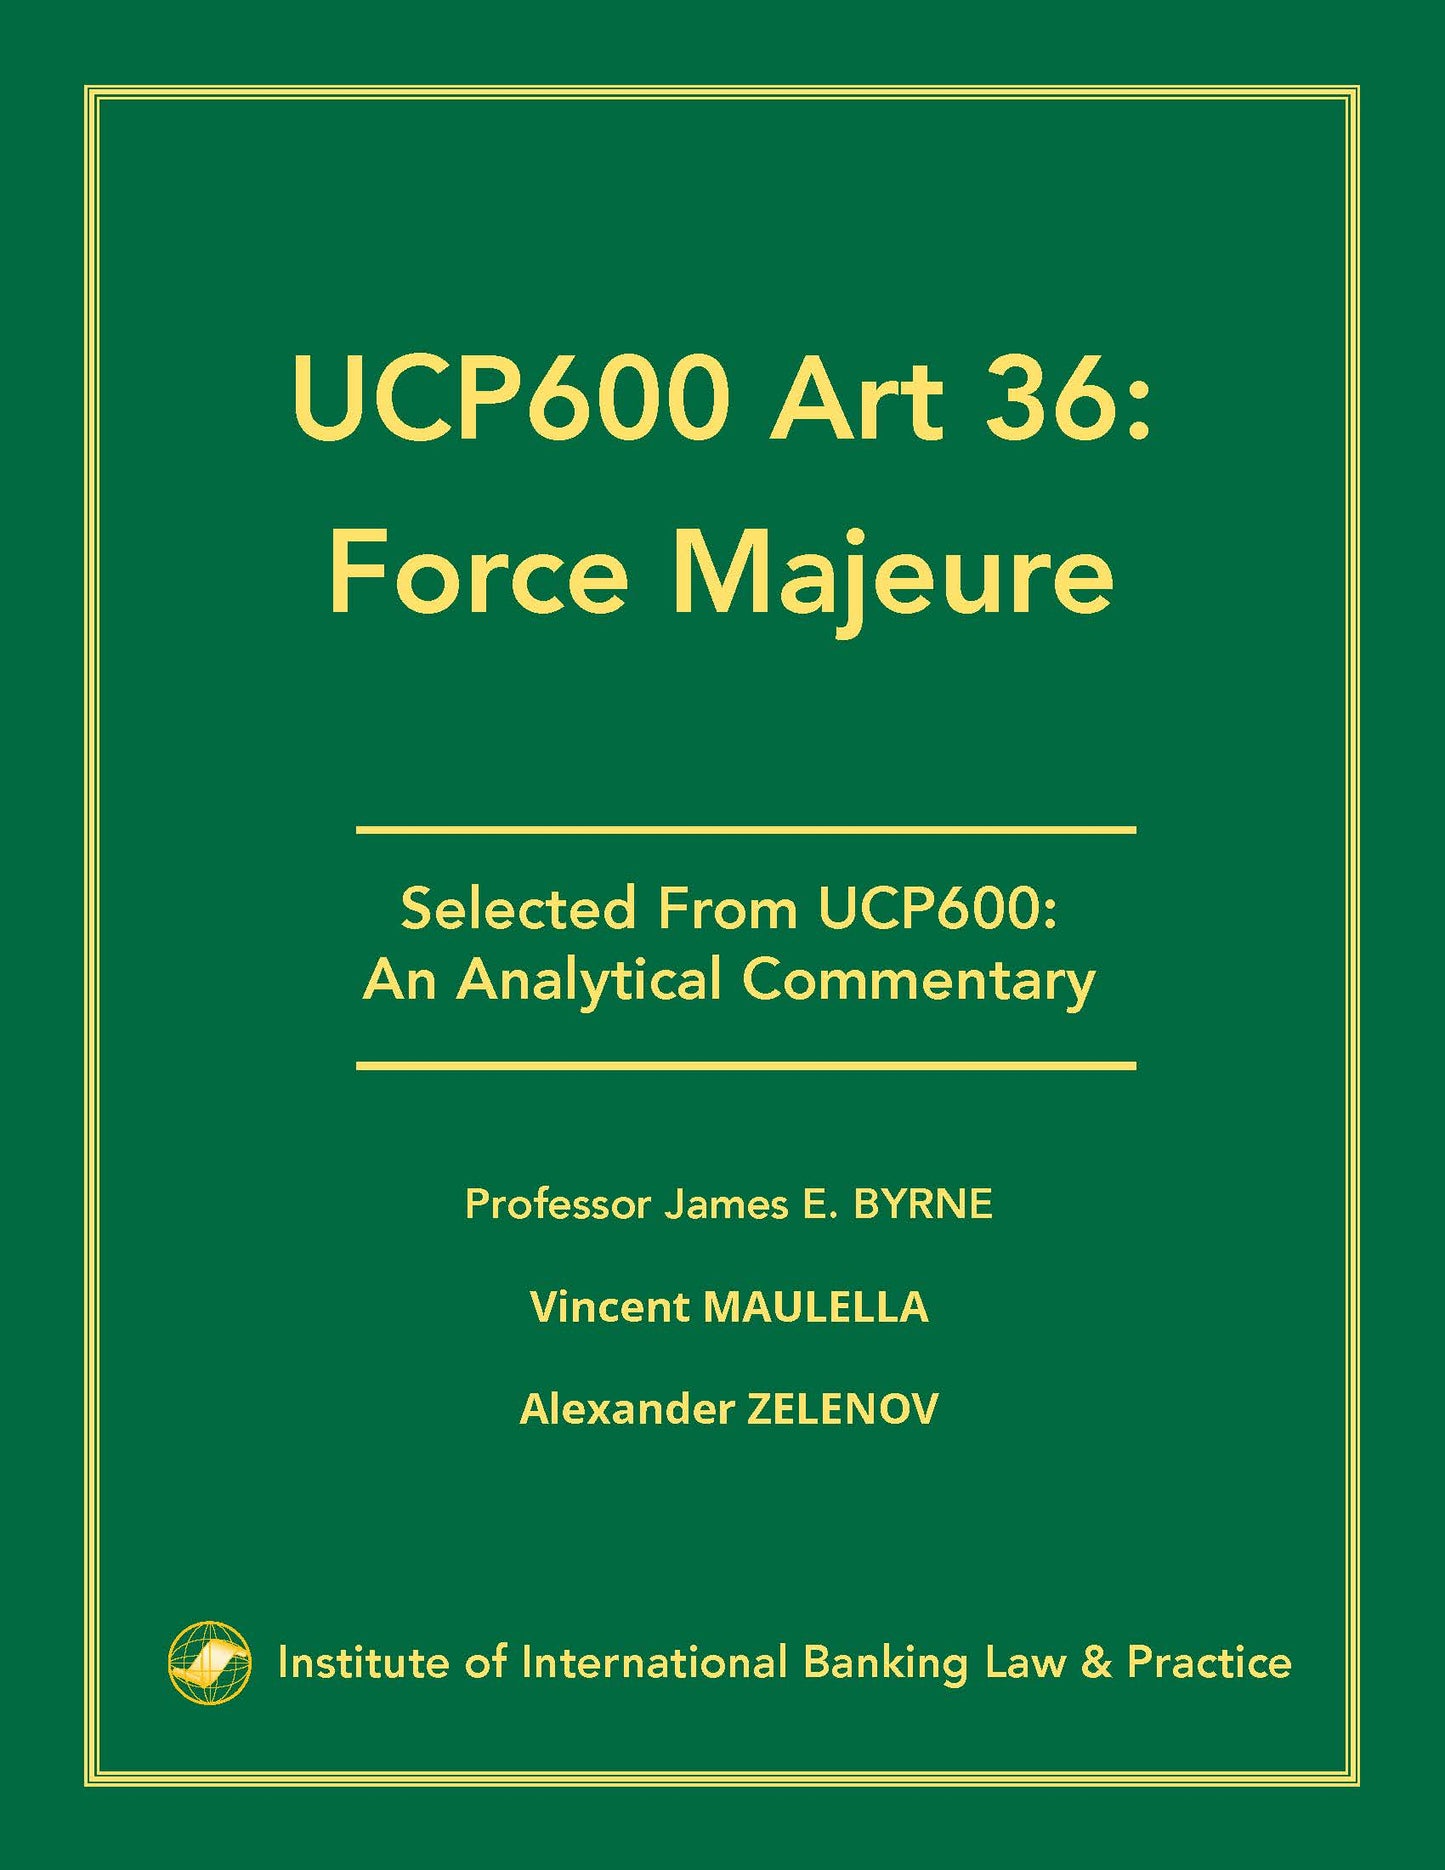 Force Majeure: Understanding UCP600 Article 36